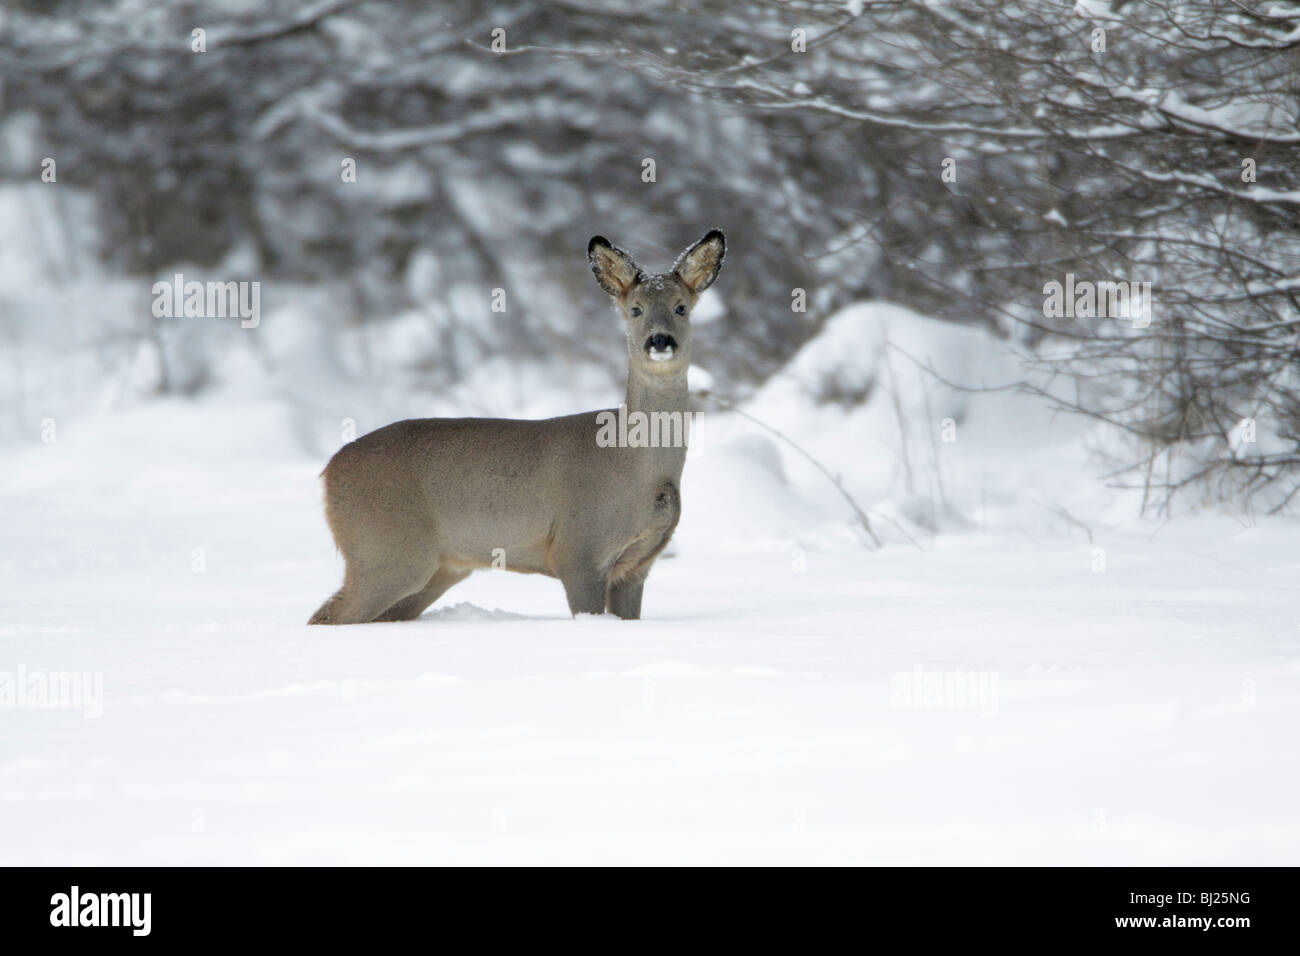 Roe deer, Capreolus capreolus, at edge of snow covered woodland in winter, Harz mountains, Lower Saxony, Germany  Stock Photo